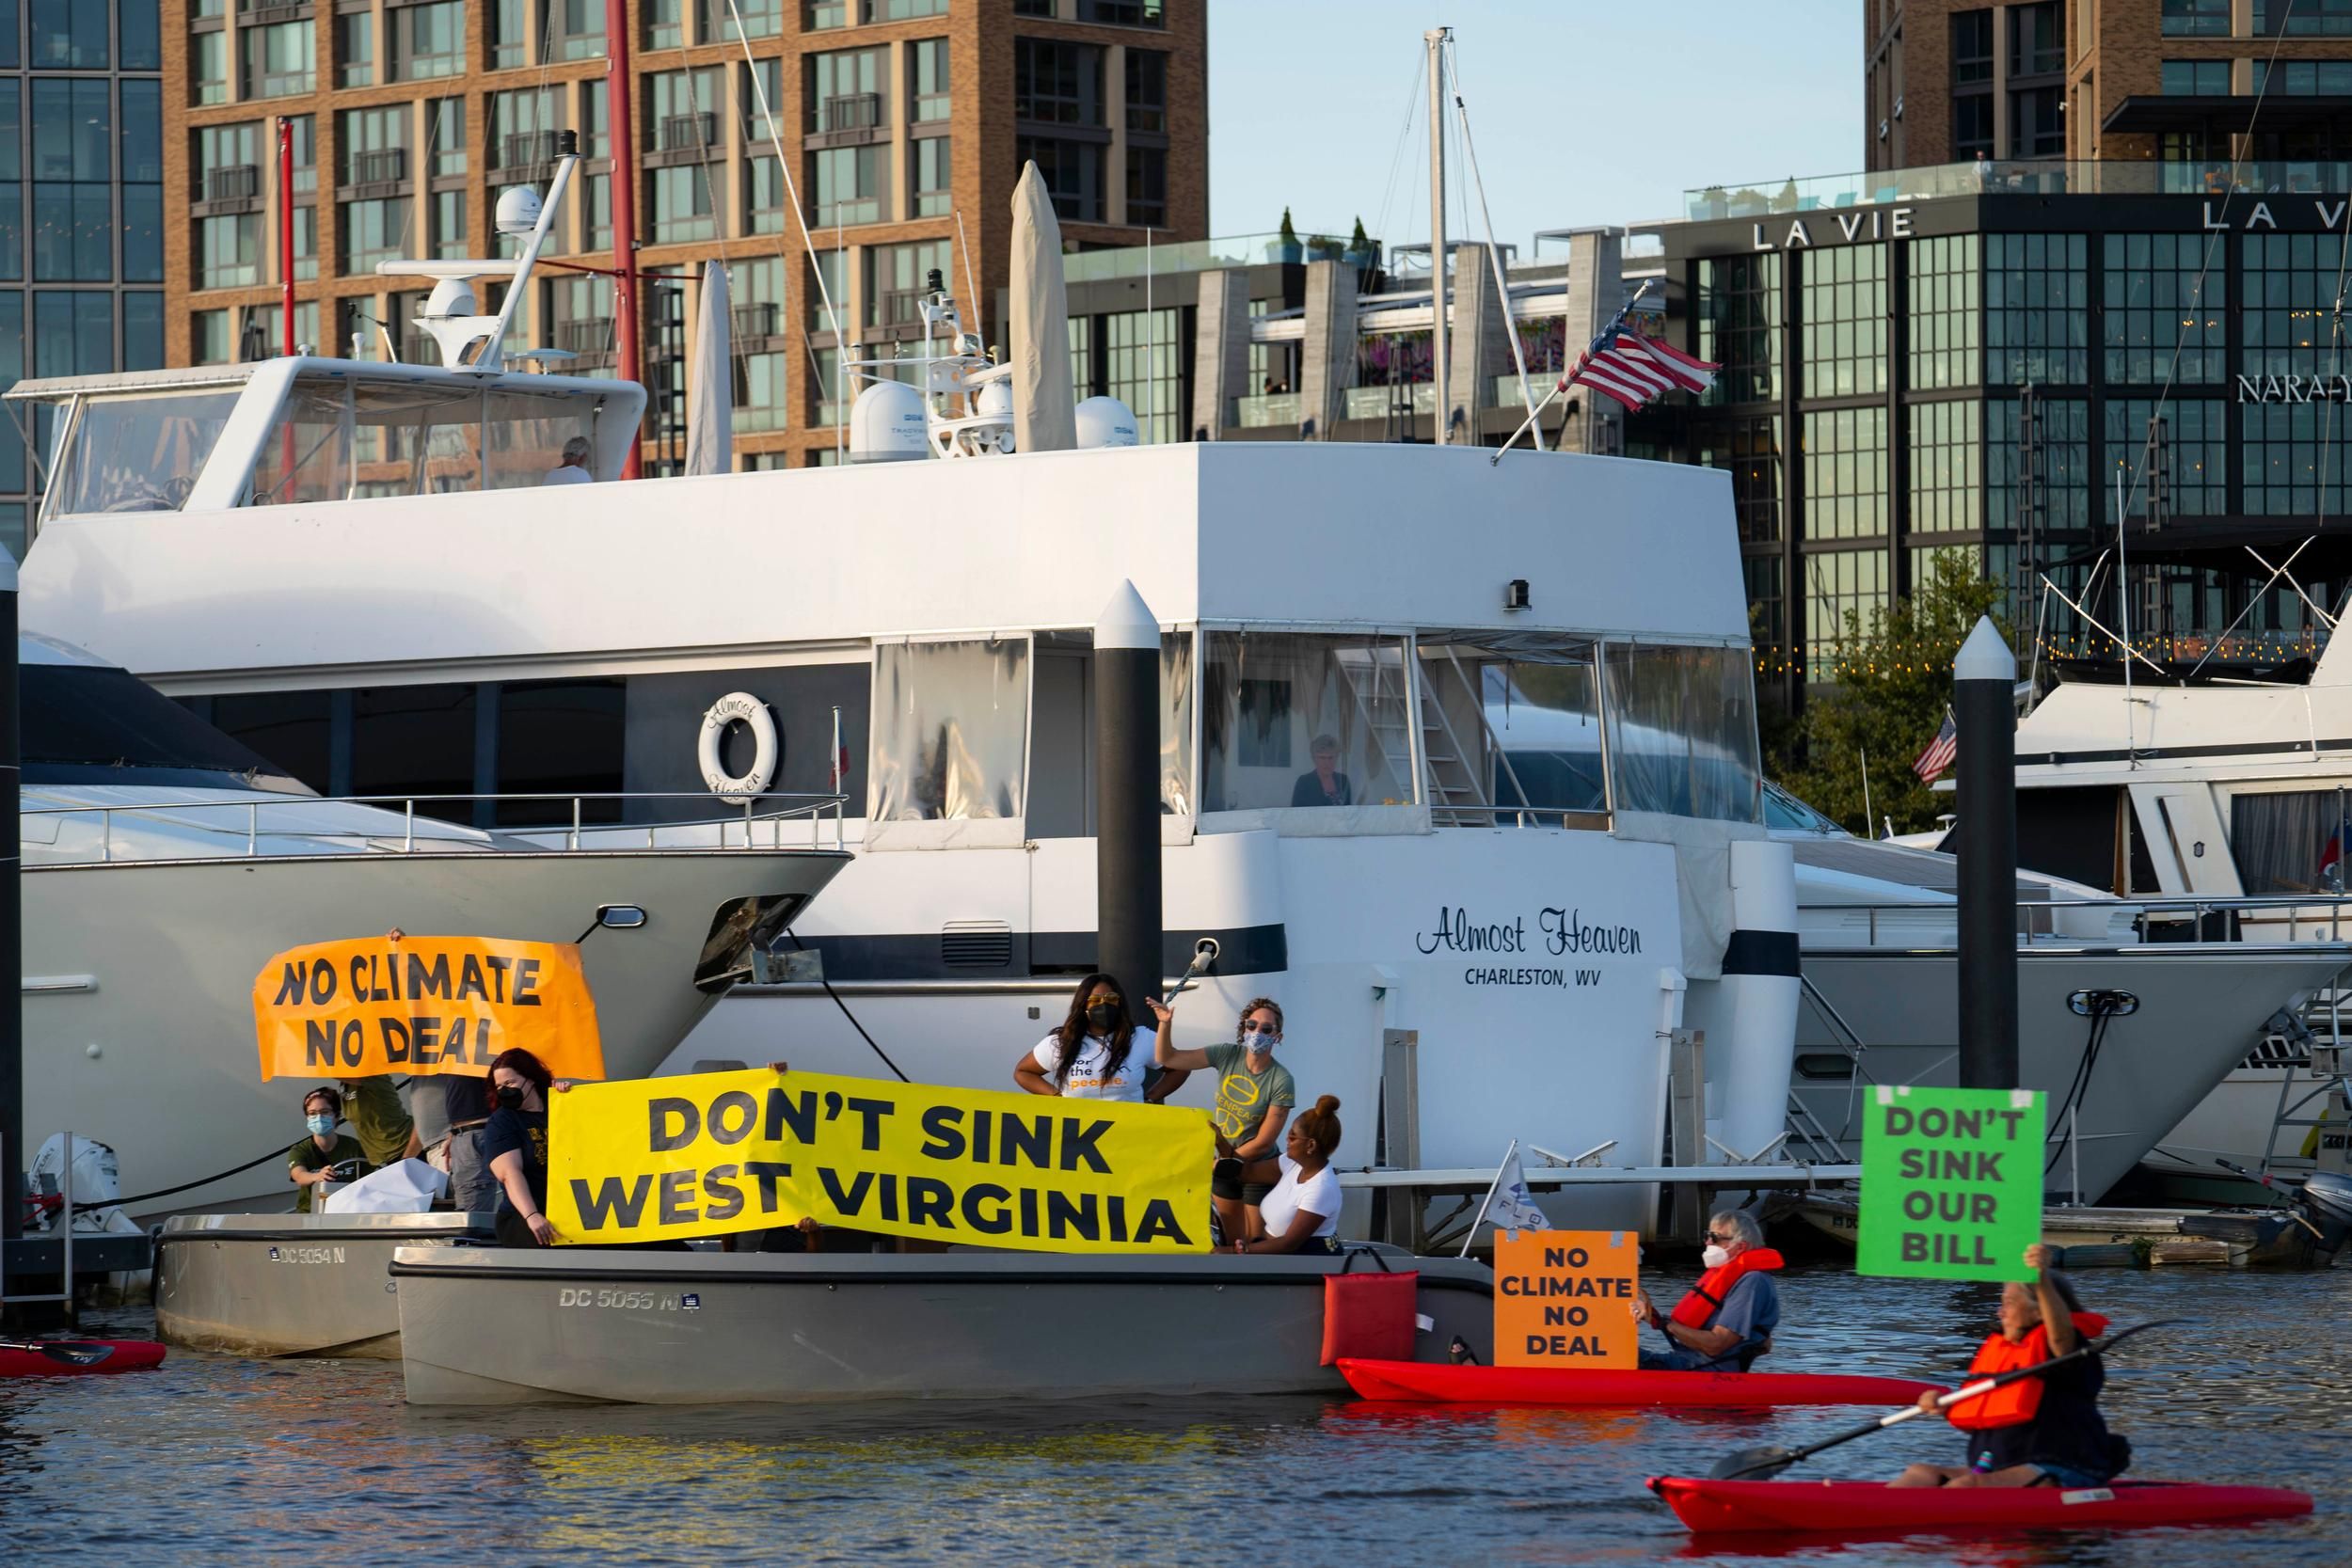 Flotilla protest in front of Manchin's yacht